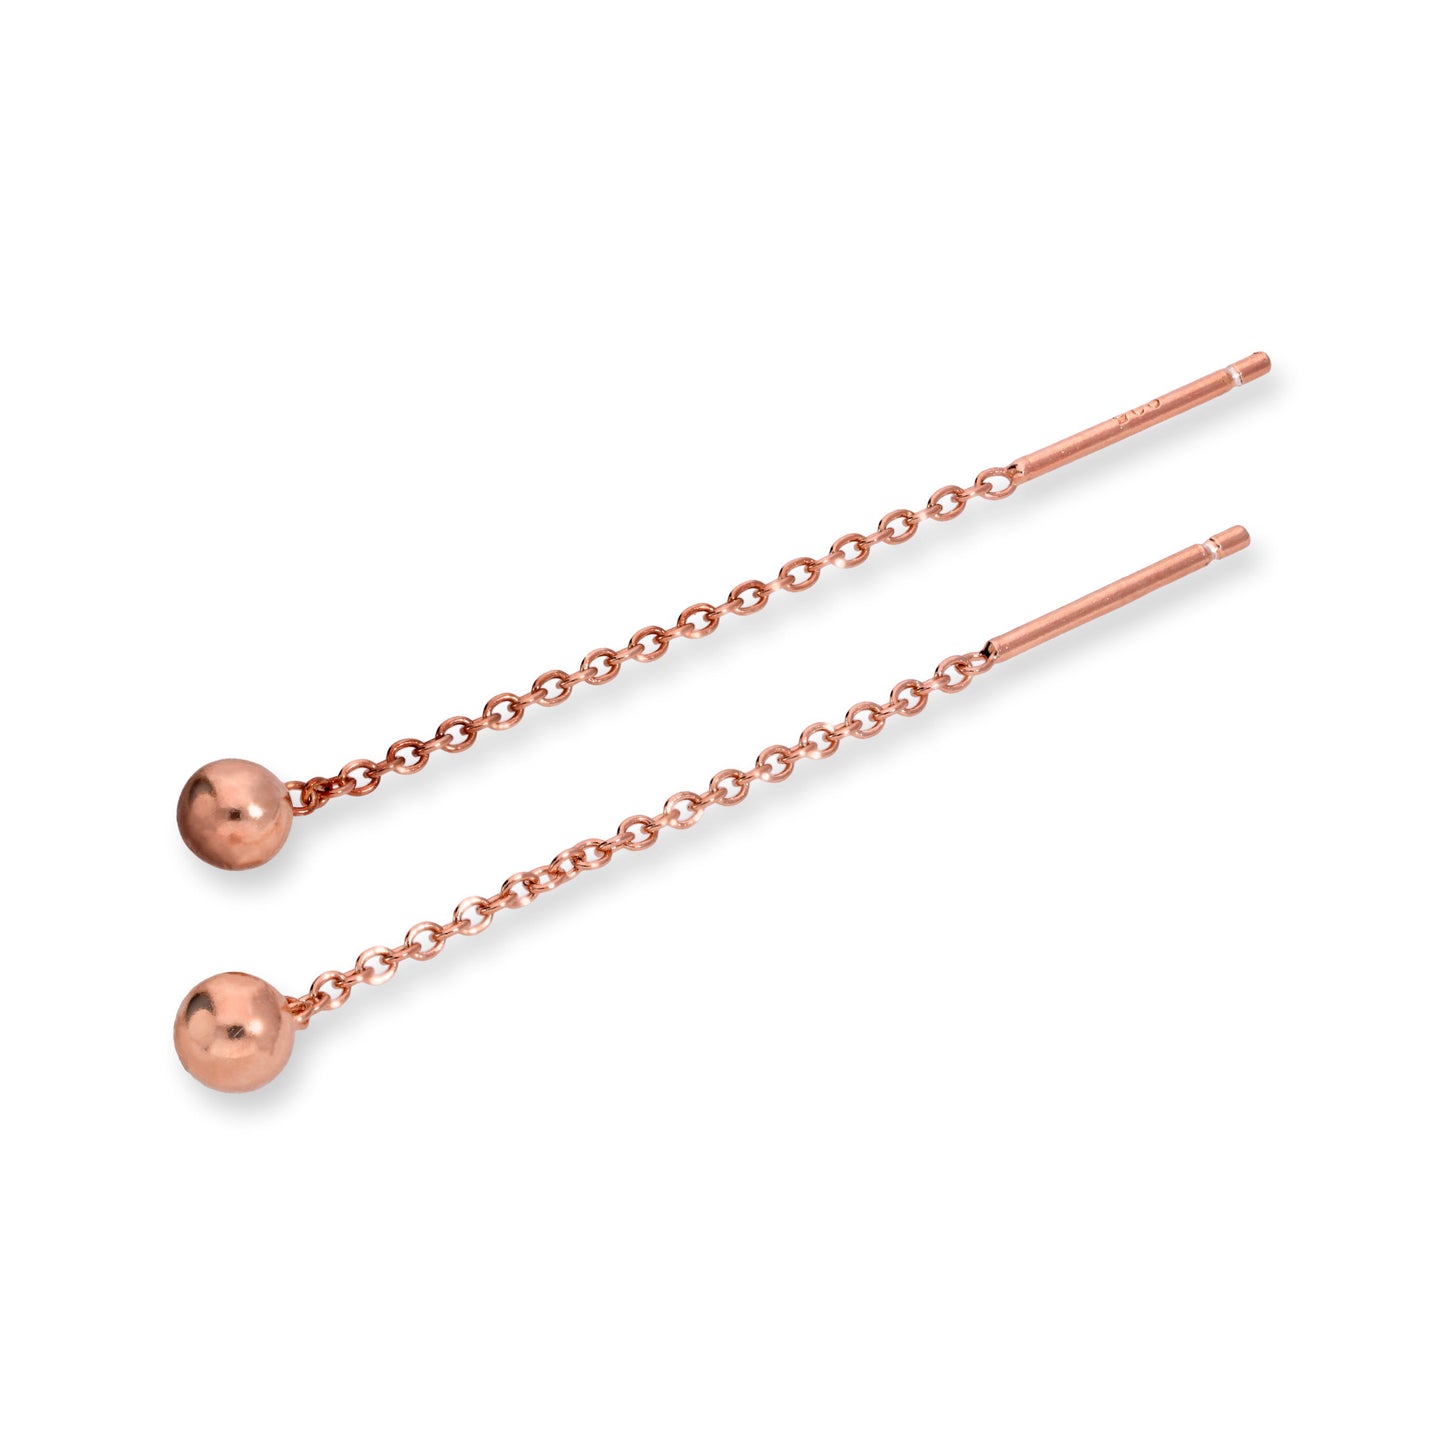 Rose Gold Plated Sterling Silver 4mm Ball Pull Through Earrings